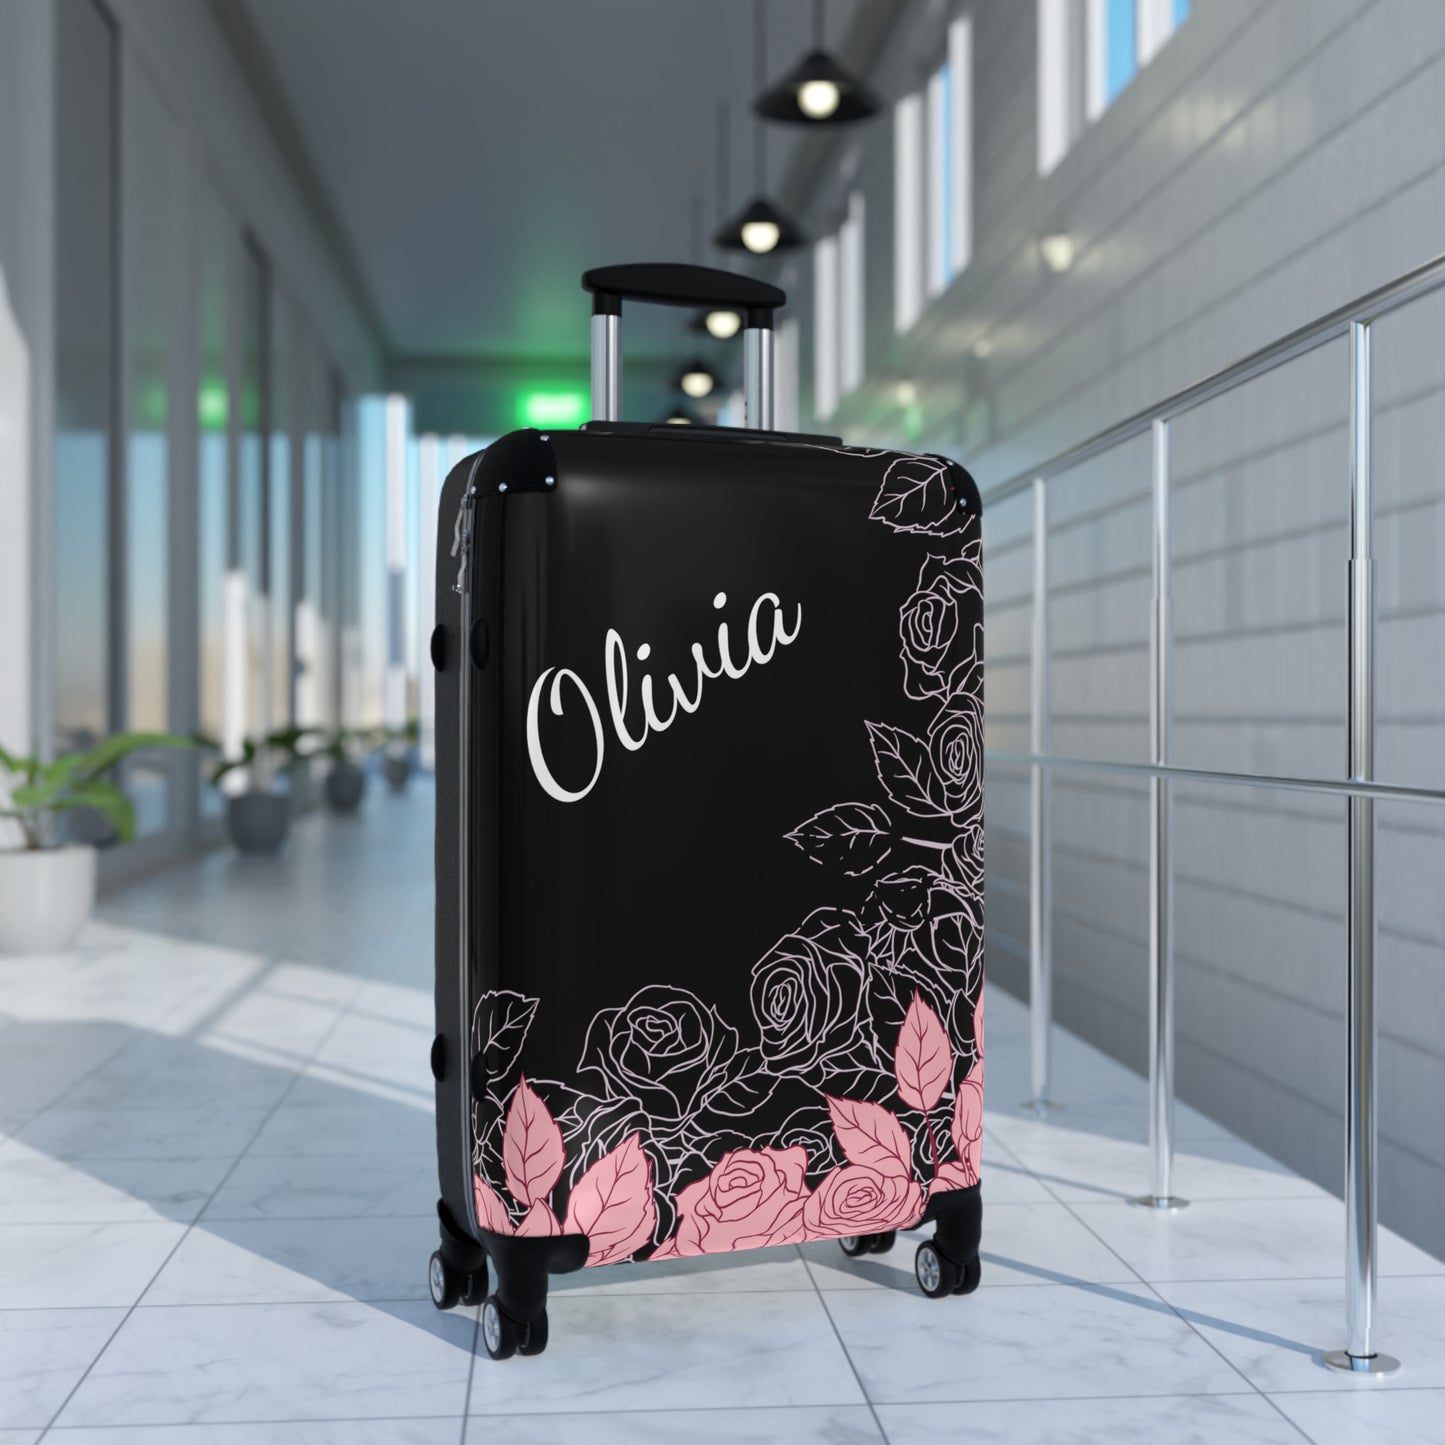 PINK ROSES SUITCASES Luggage By Artzira, All Sizes, Artistic Designs, Double Wheeled Spinner